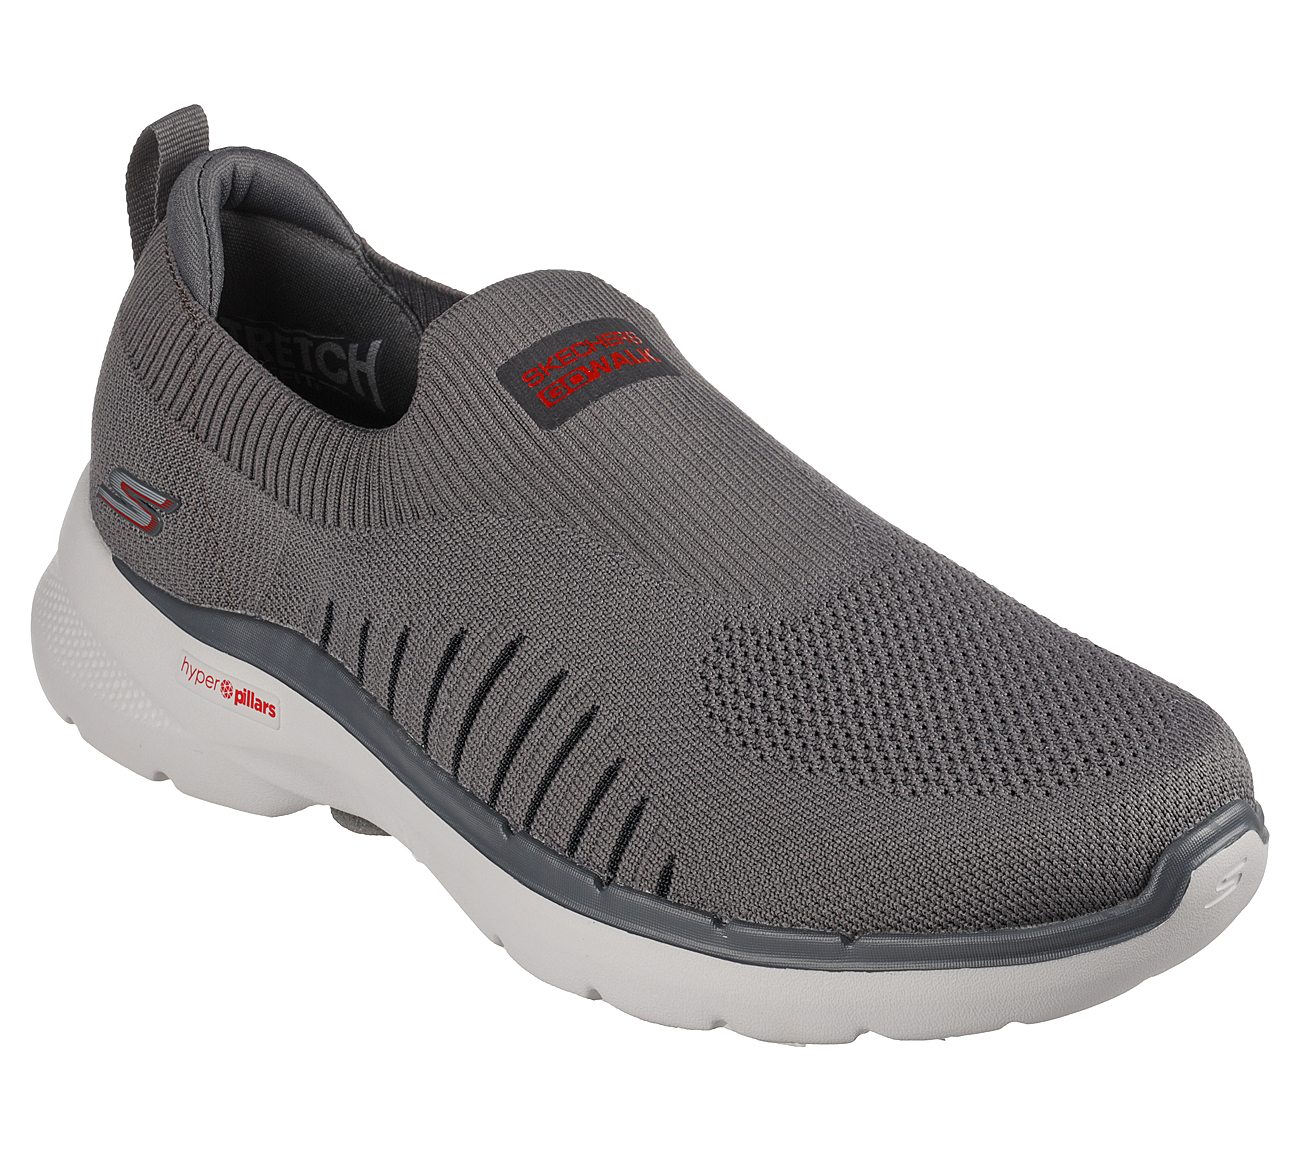 GO WALK 6, GREY/RED Footwear Lateral View